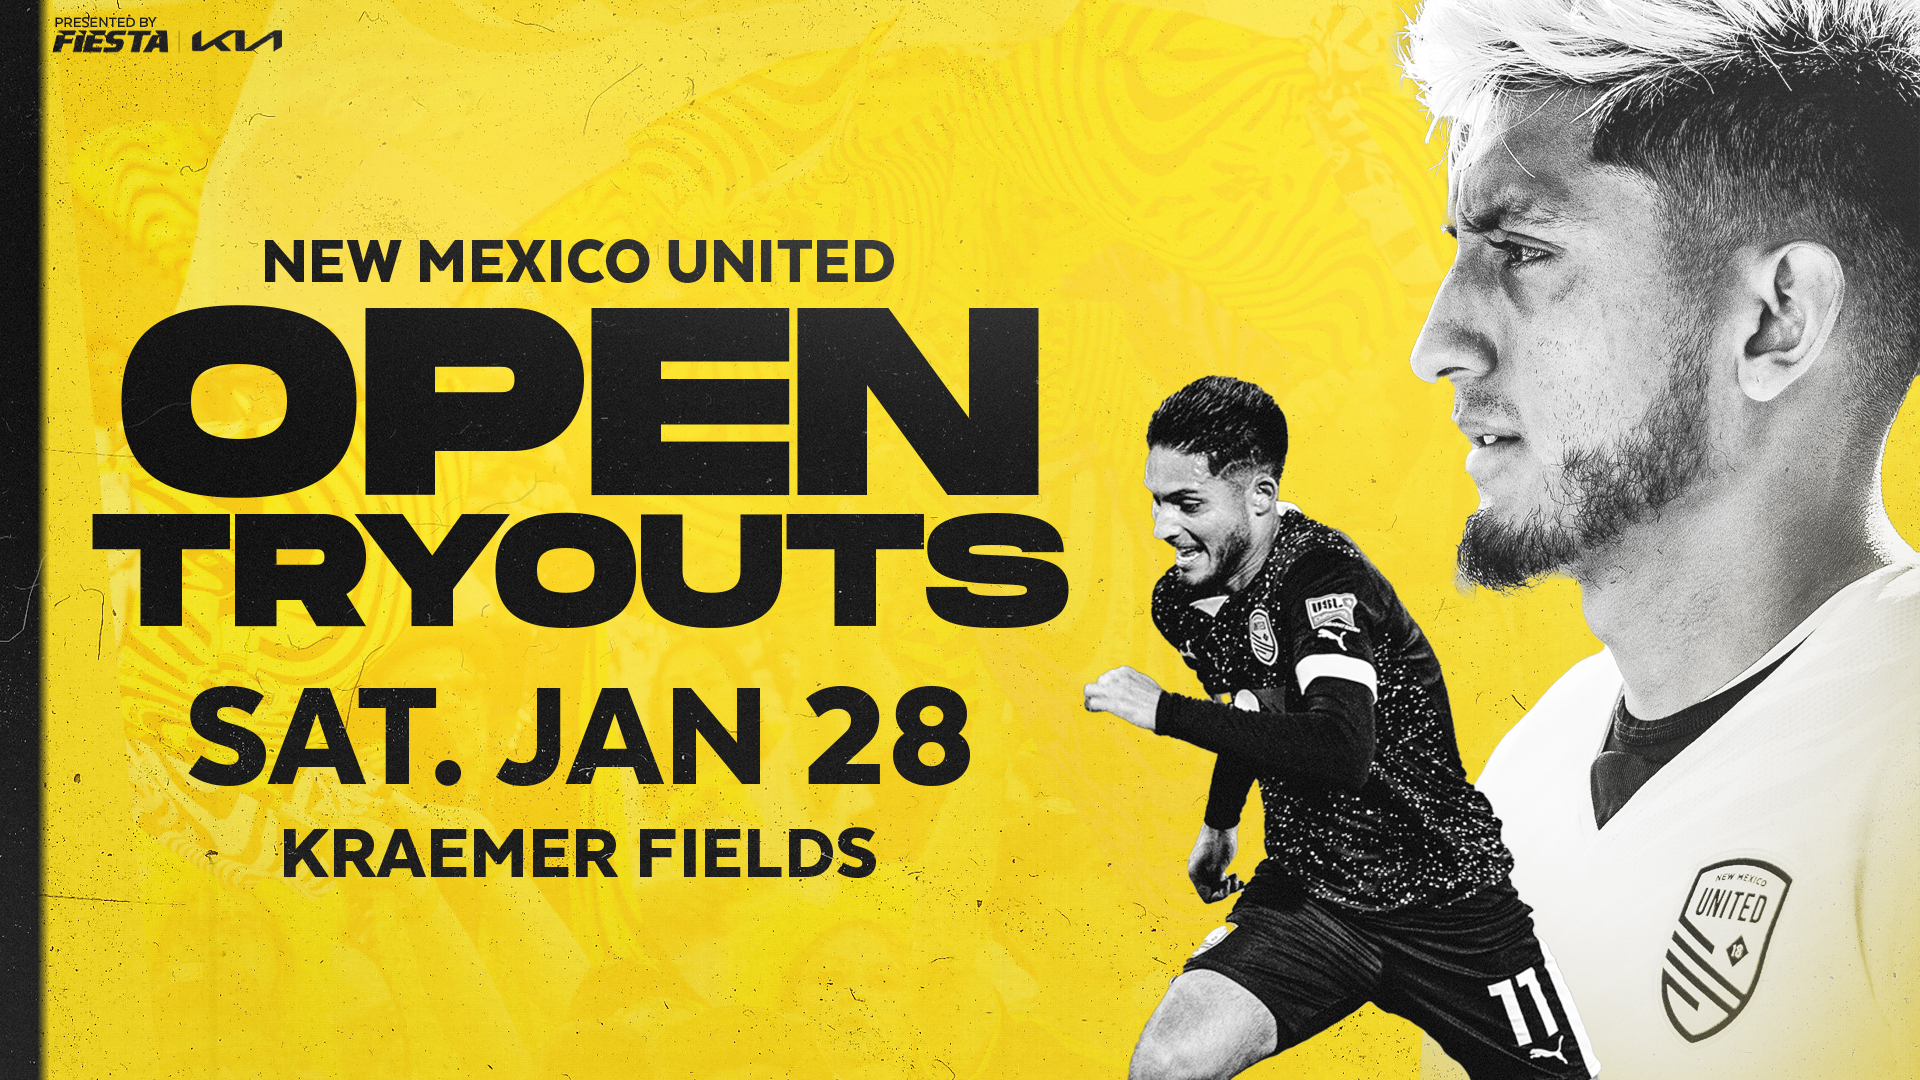 NEW MEXICO ANNOUNCES OPEN TRYOUT FOR 2023 USL CHAMPIONSHIP TEAM New